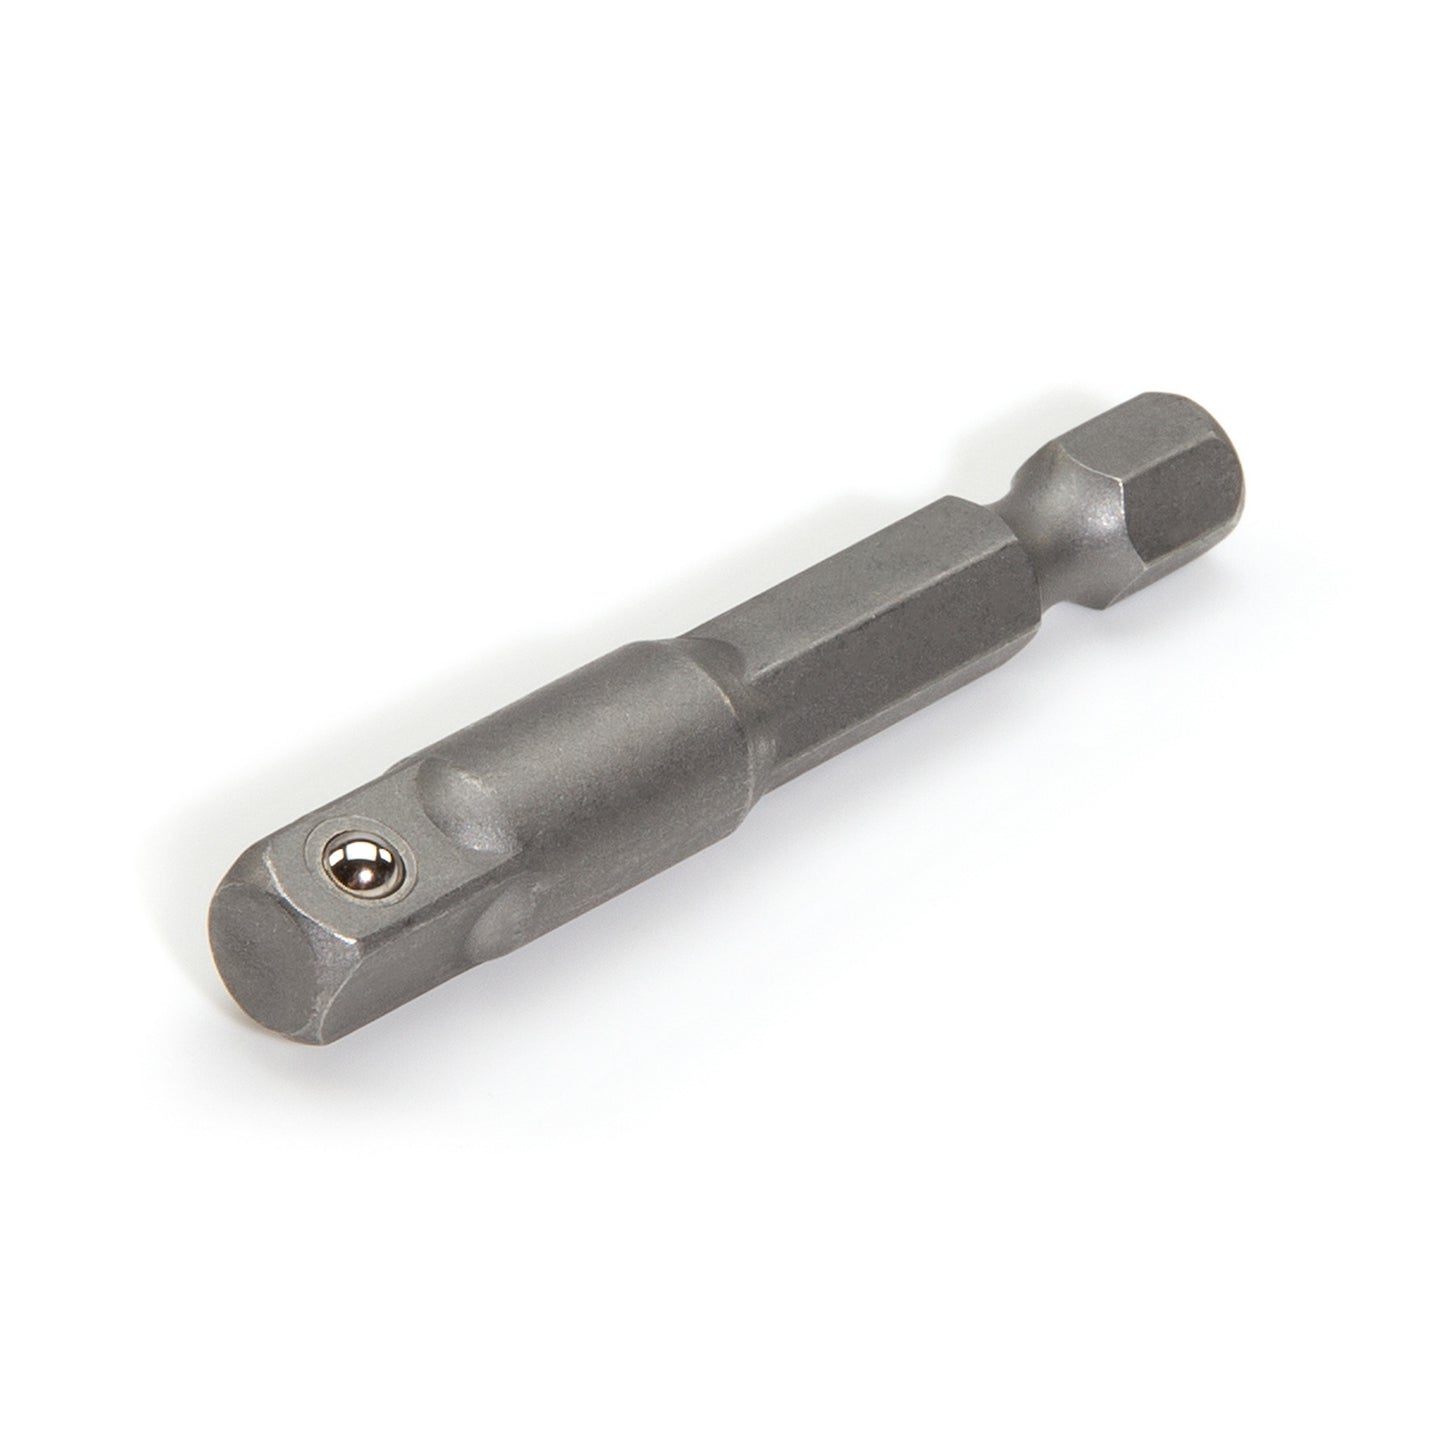 1/4-Inch Hex Bit to 1/4-Inch Square Drive Expansion Adapter